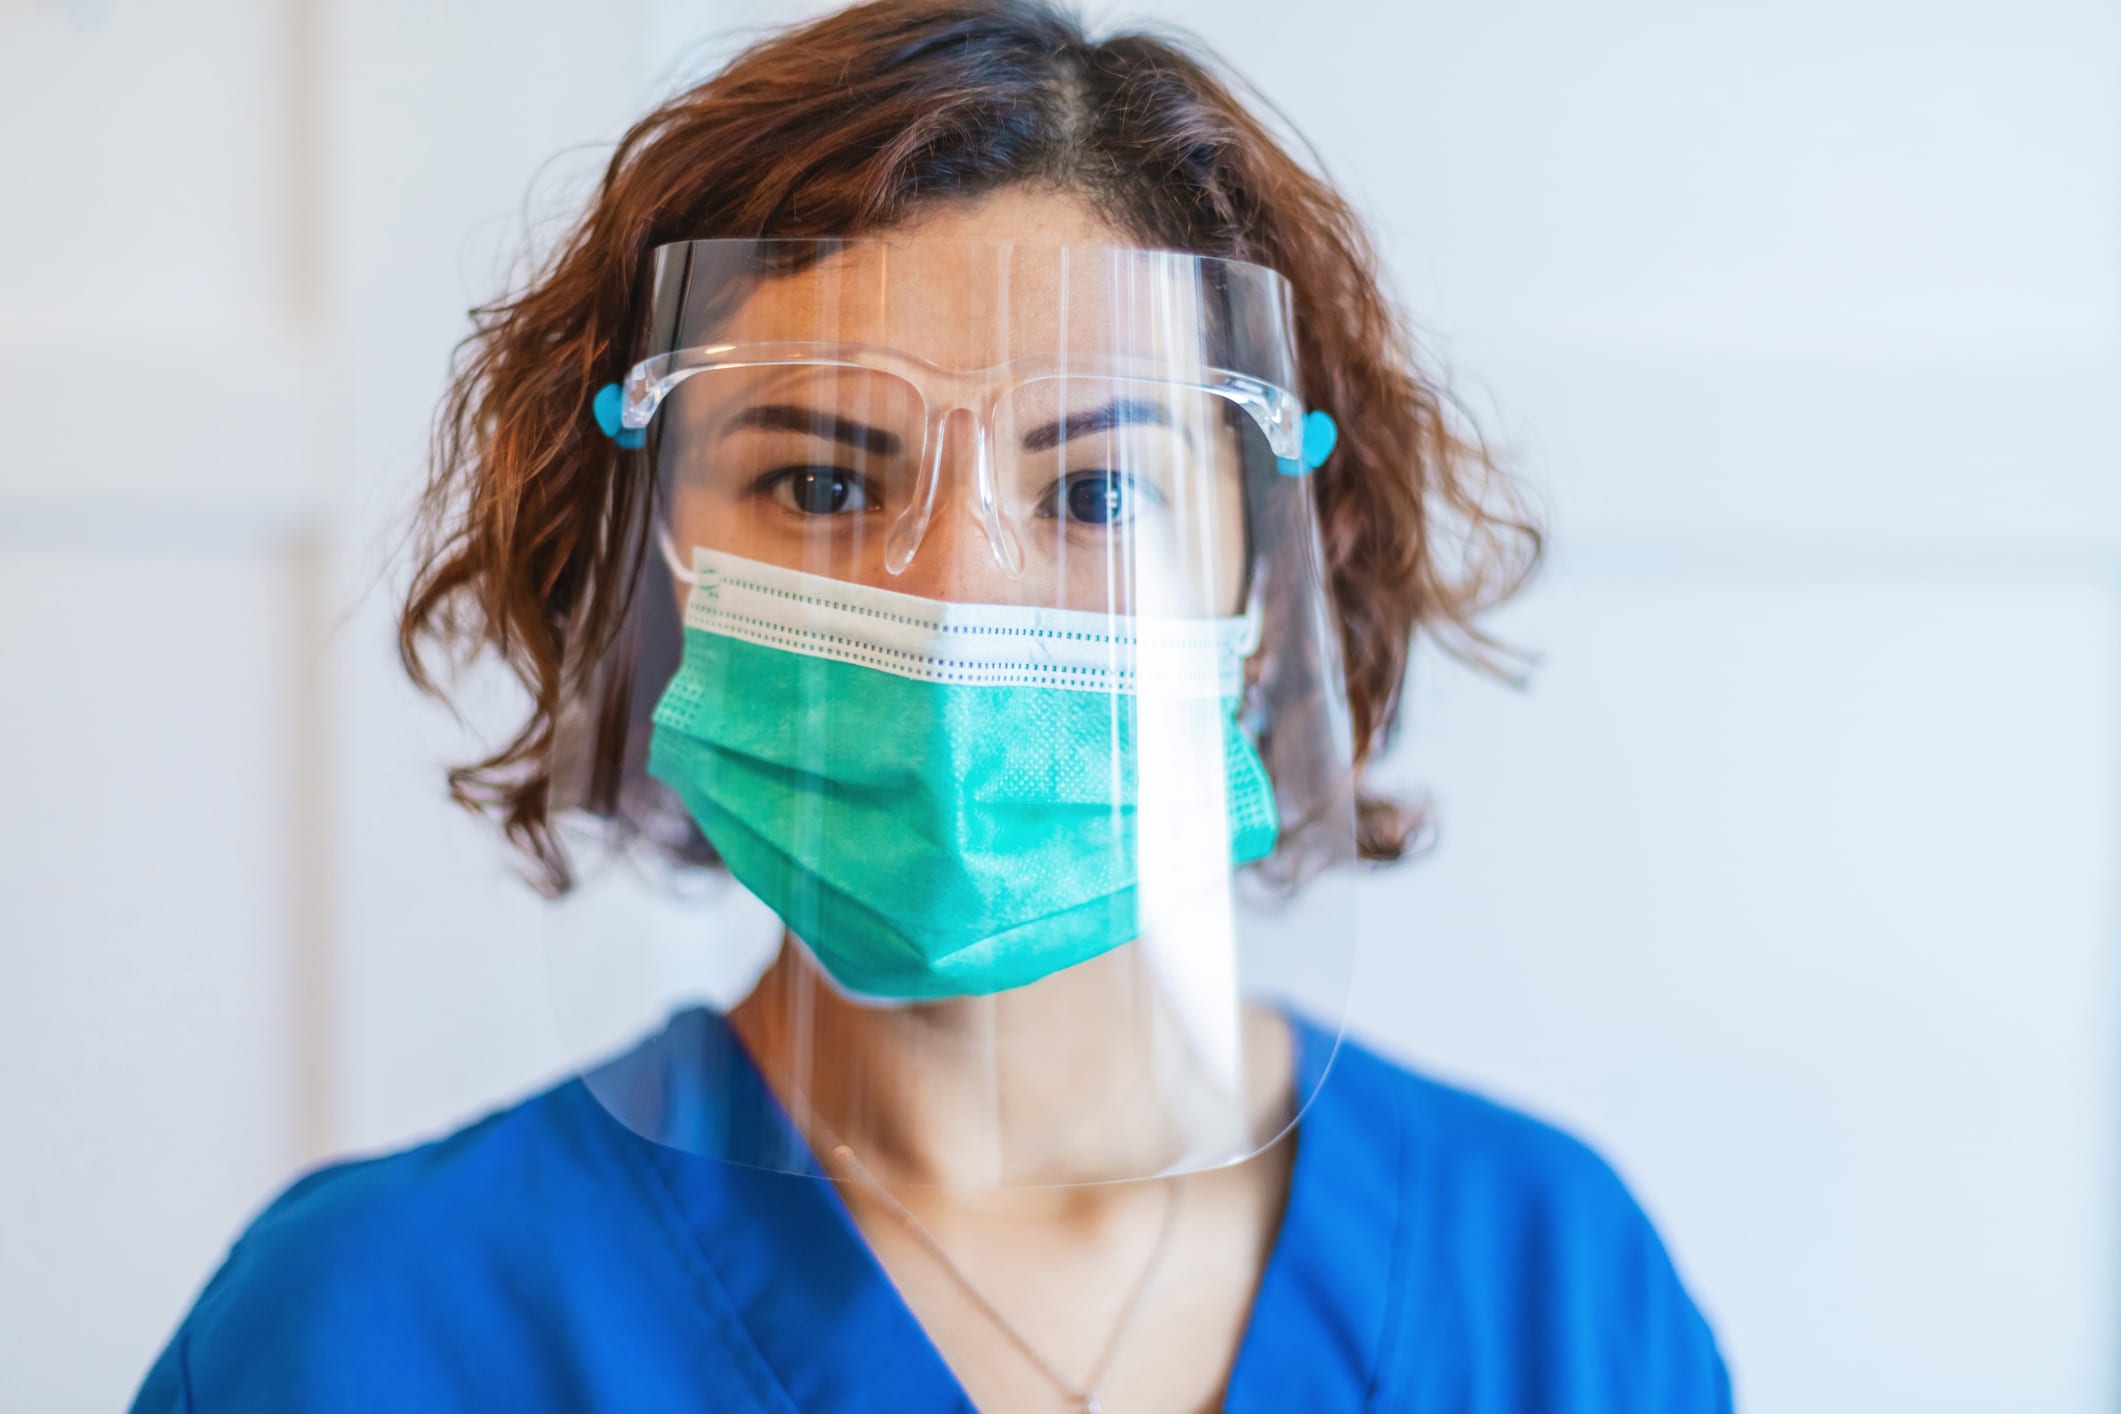 Female Nurse Wearing Protective Face-mask and Face Shield Photo Series